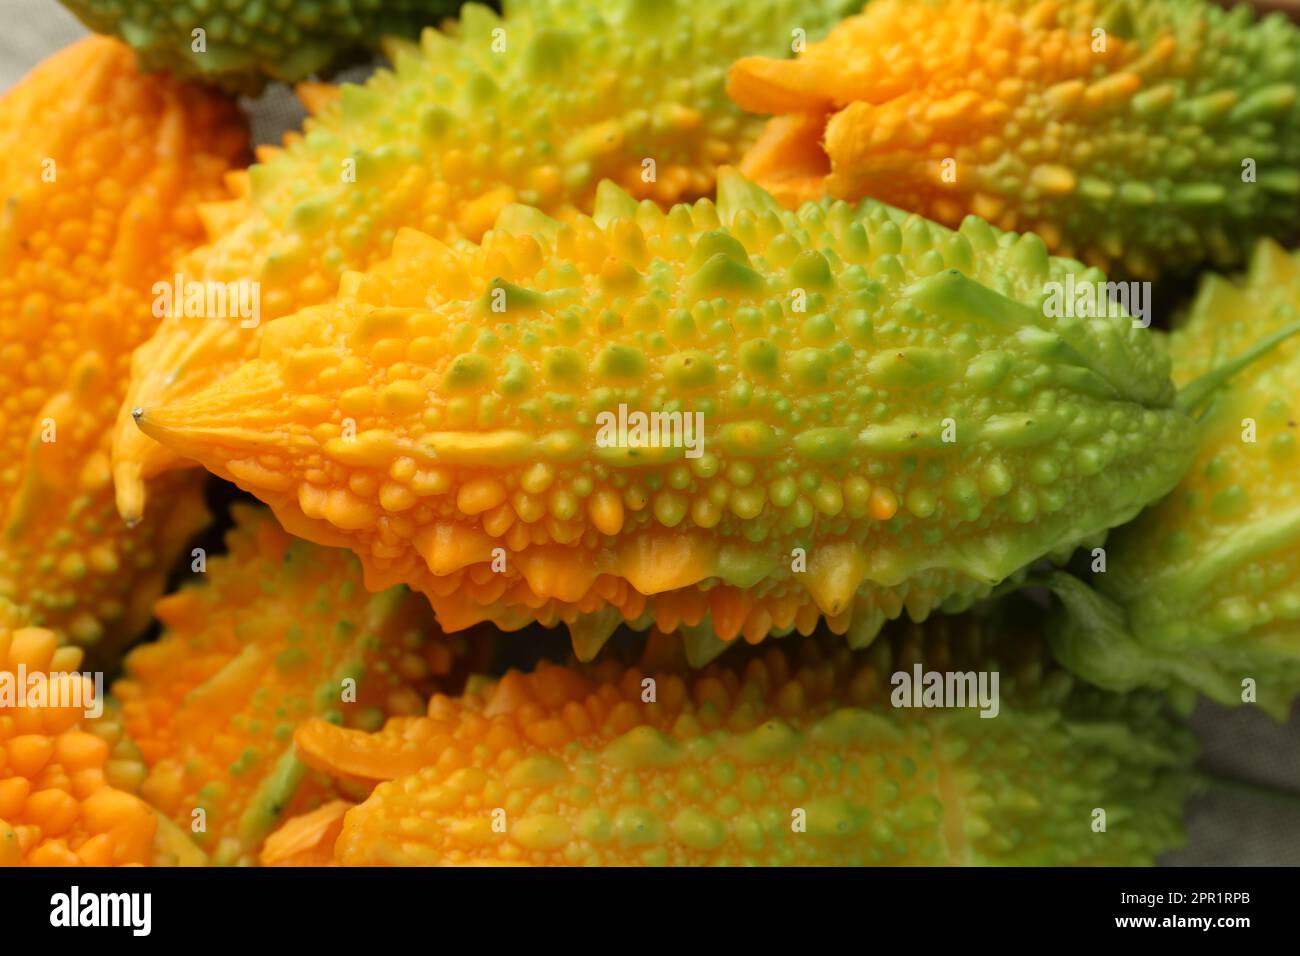 Many fresh bitter melons as background, closeup Stock Photo